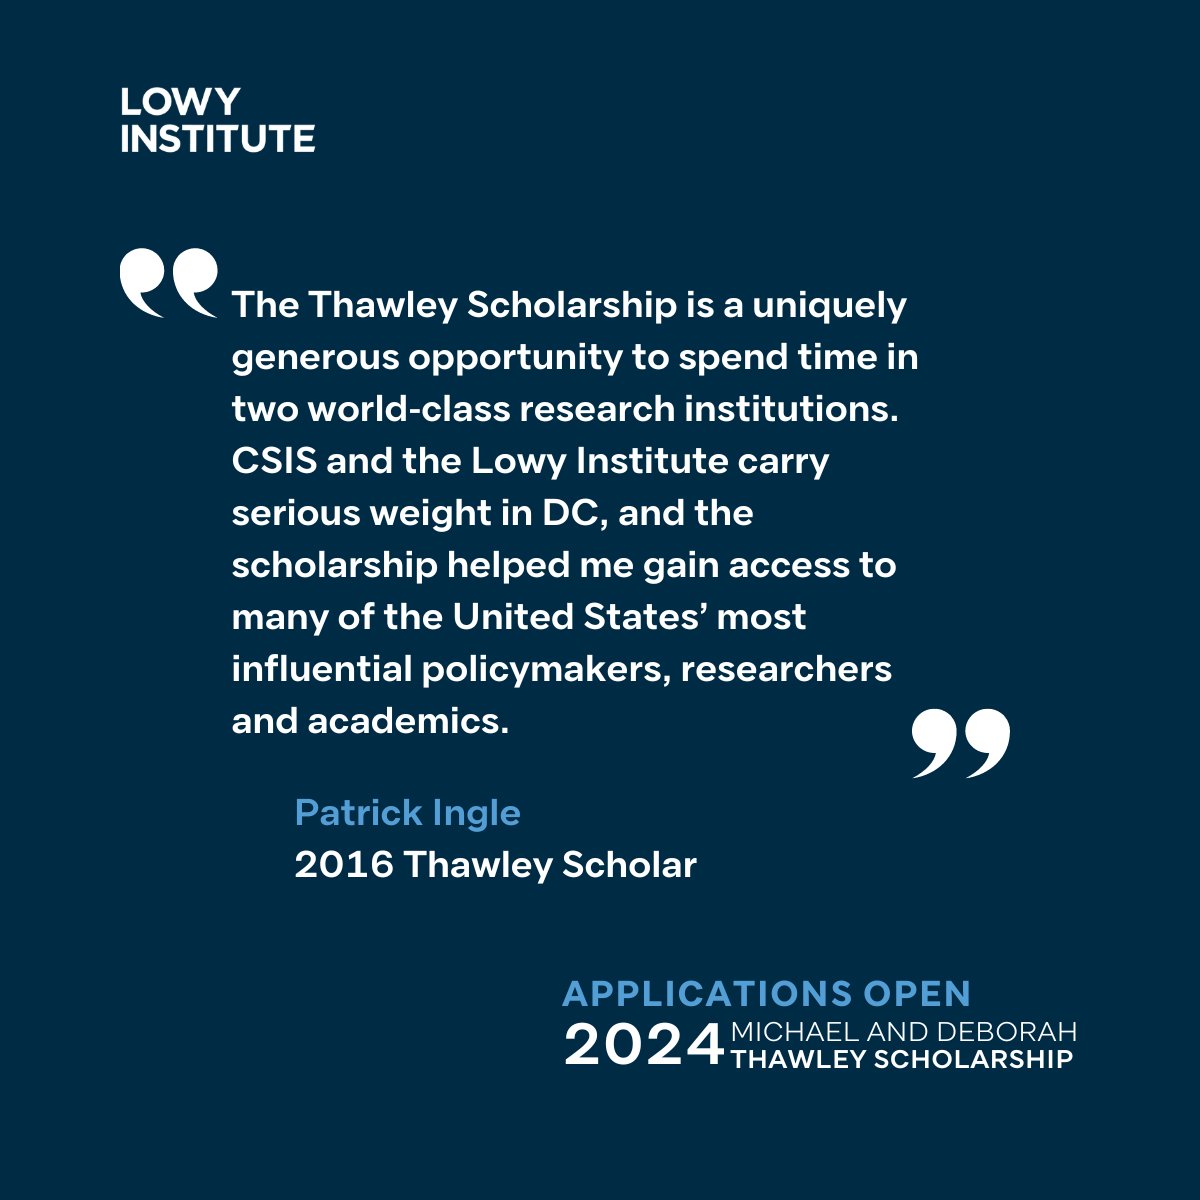 The Thawley Scholarship offers an Australian scholar a unique opportunity to work at the @LowyInstitute in Sydney and @CSIS in Washington, DC. Applications are open now. lowyinstitute.org/about/careers